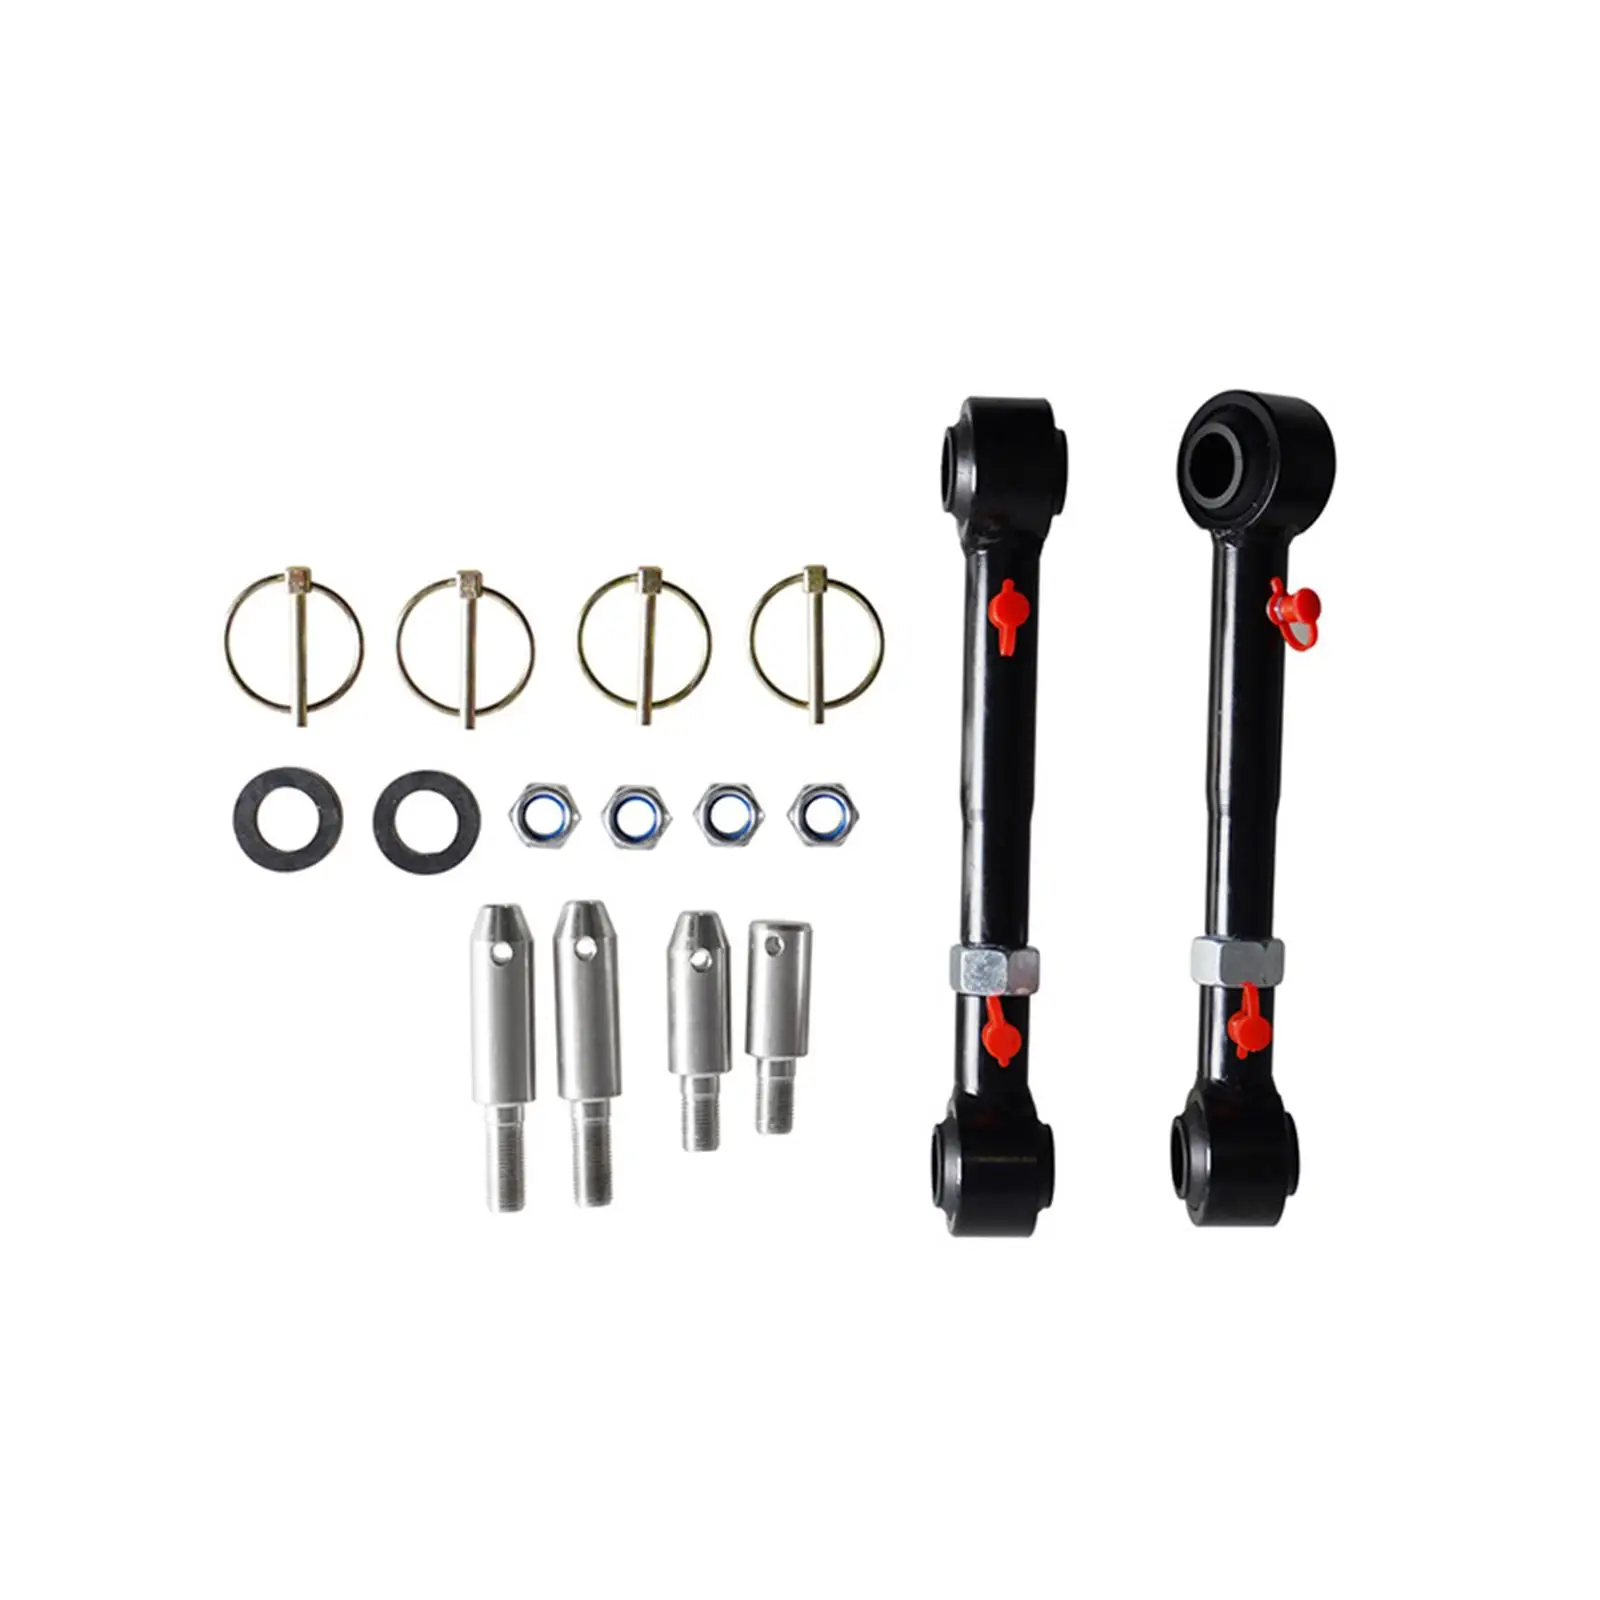 Car Adjustable Front Swaybar Direct Replaces Repair Parts Sway Bar Link Bushings Front Kit for Jeep Wrangler 2007-2018